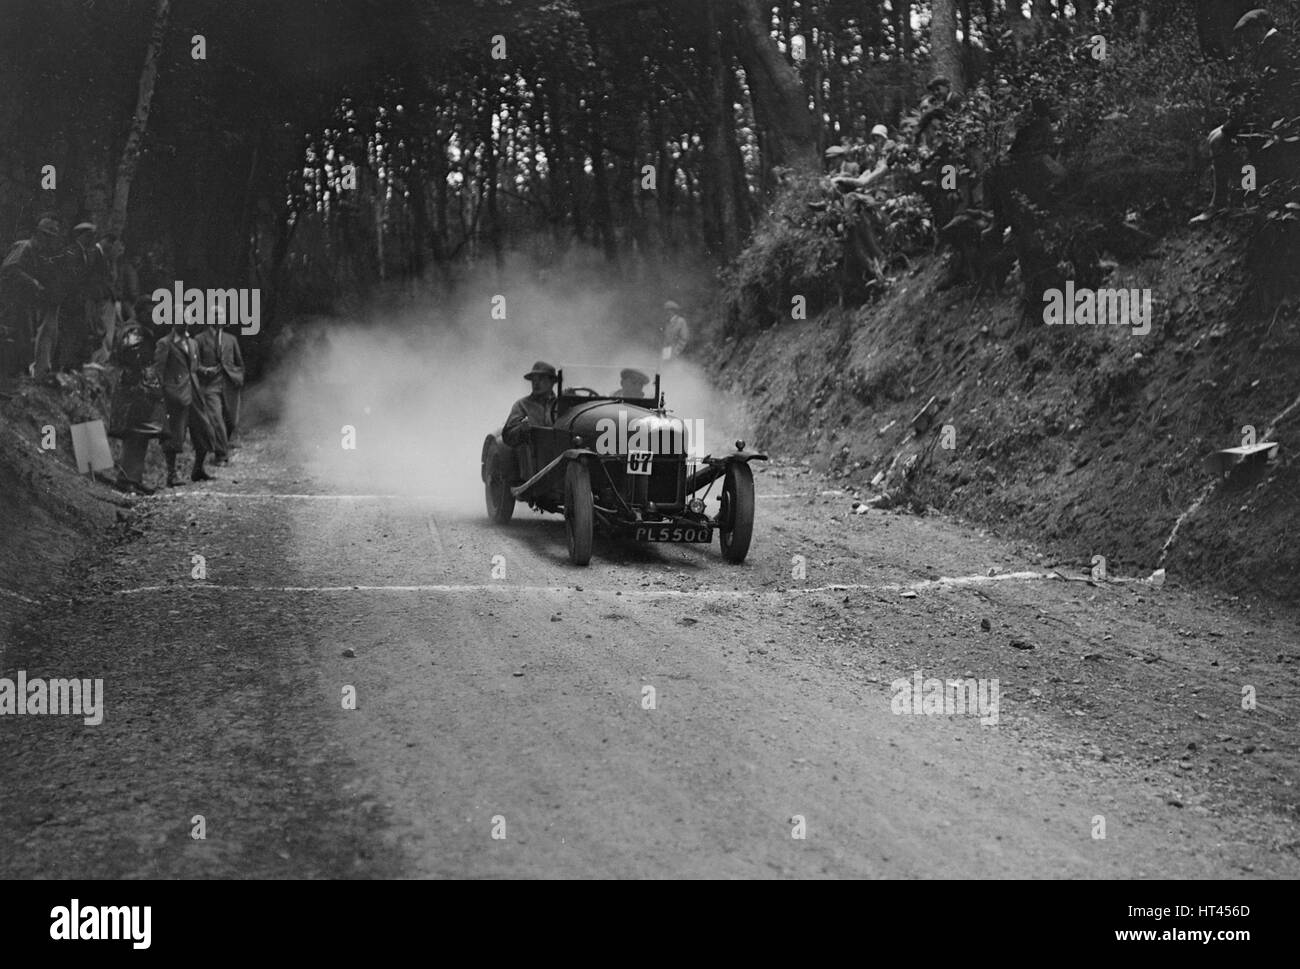 Amilcar taking part in a motoring trial, c1930s. Artist: Bill Brunell. Stock Photo